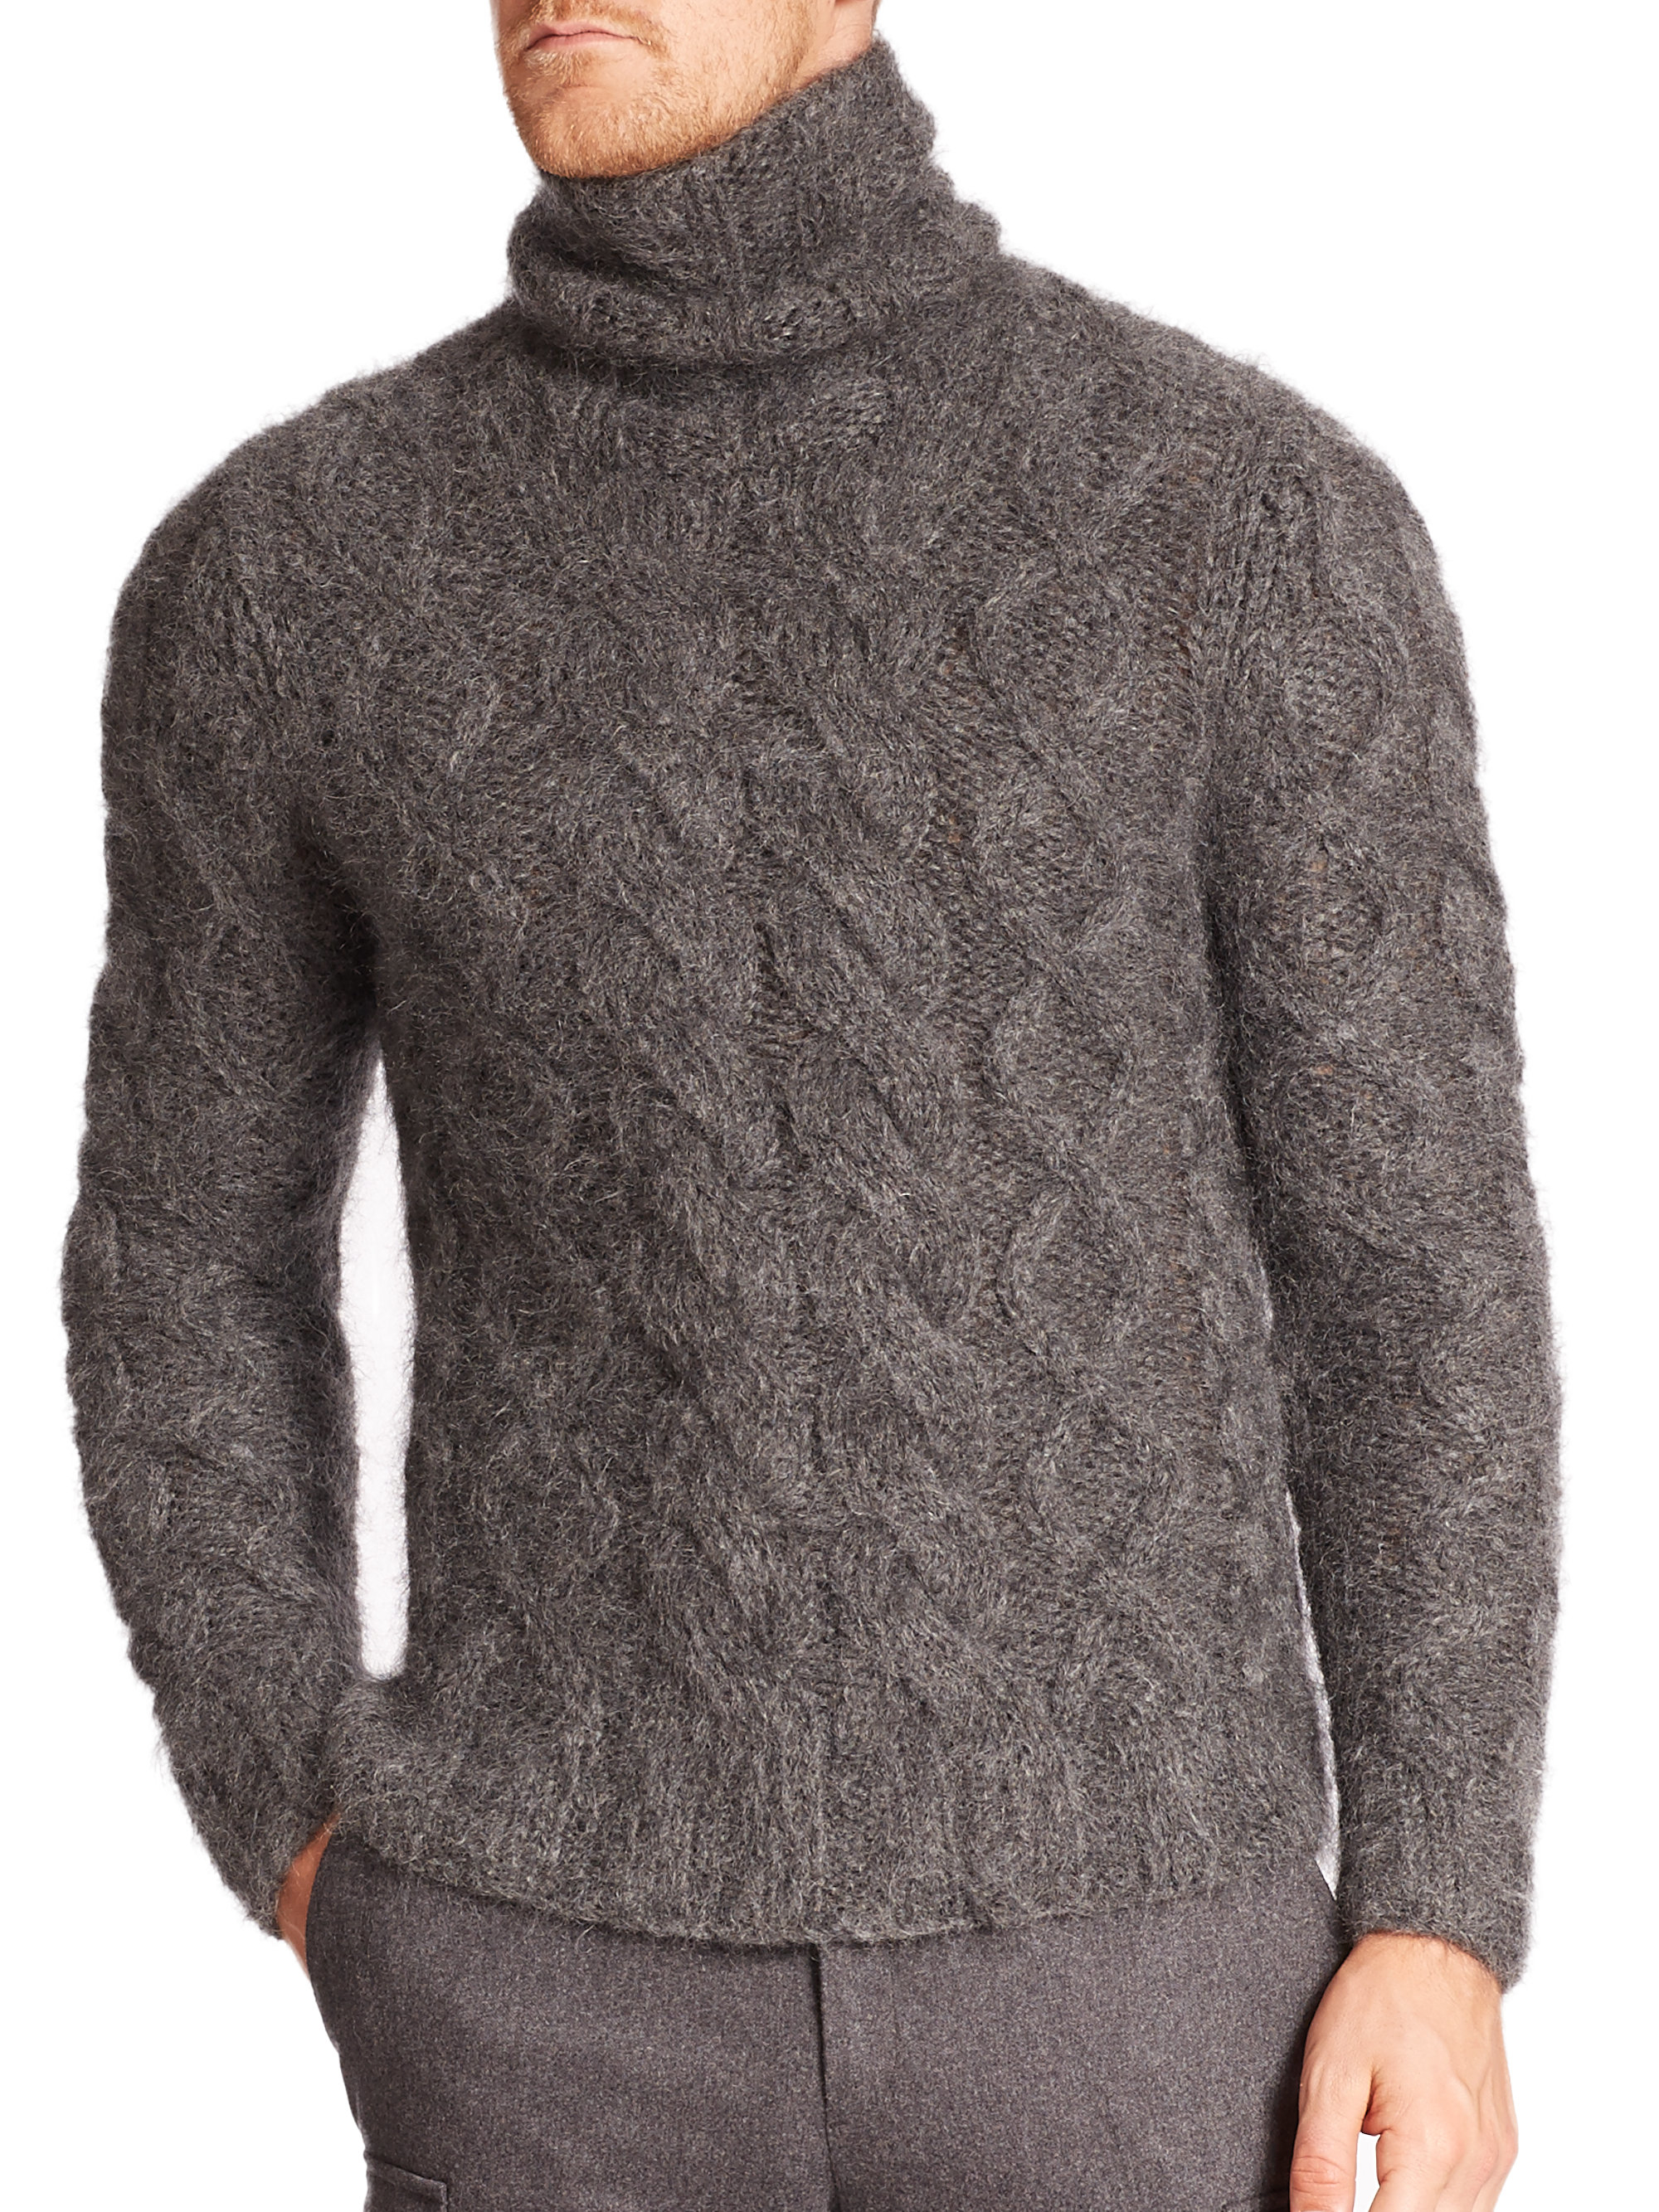 Lyst - Michael Kors Mohair-blend Cable Turtleneck Sweater in Gray for Men